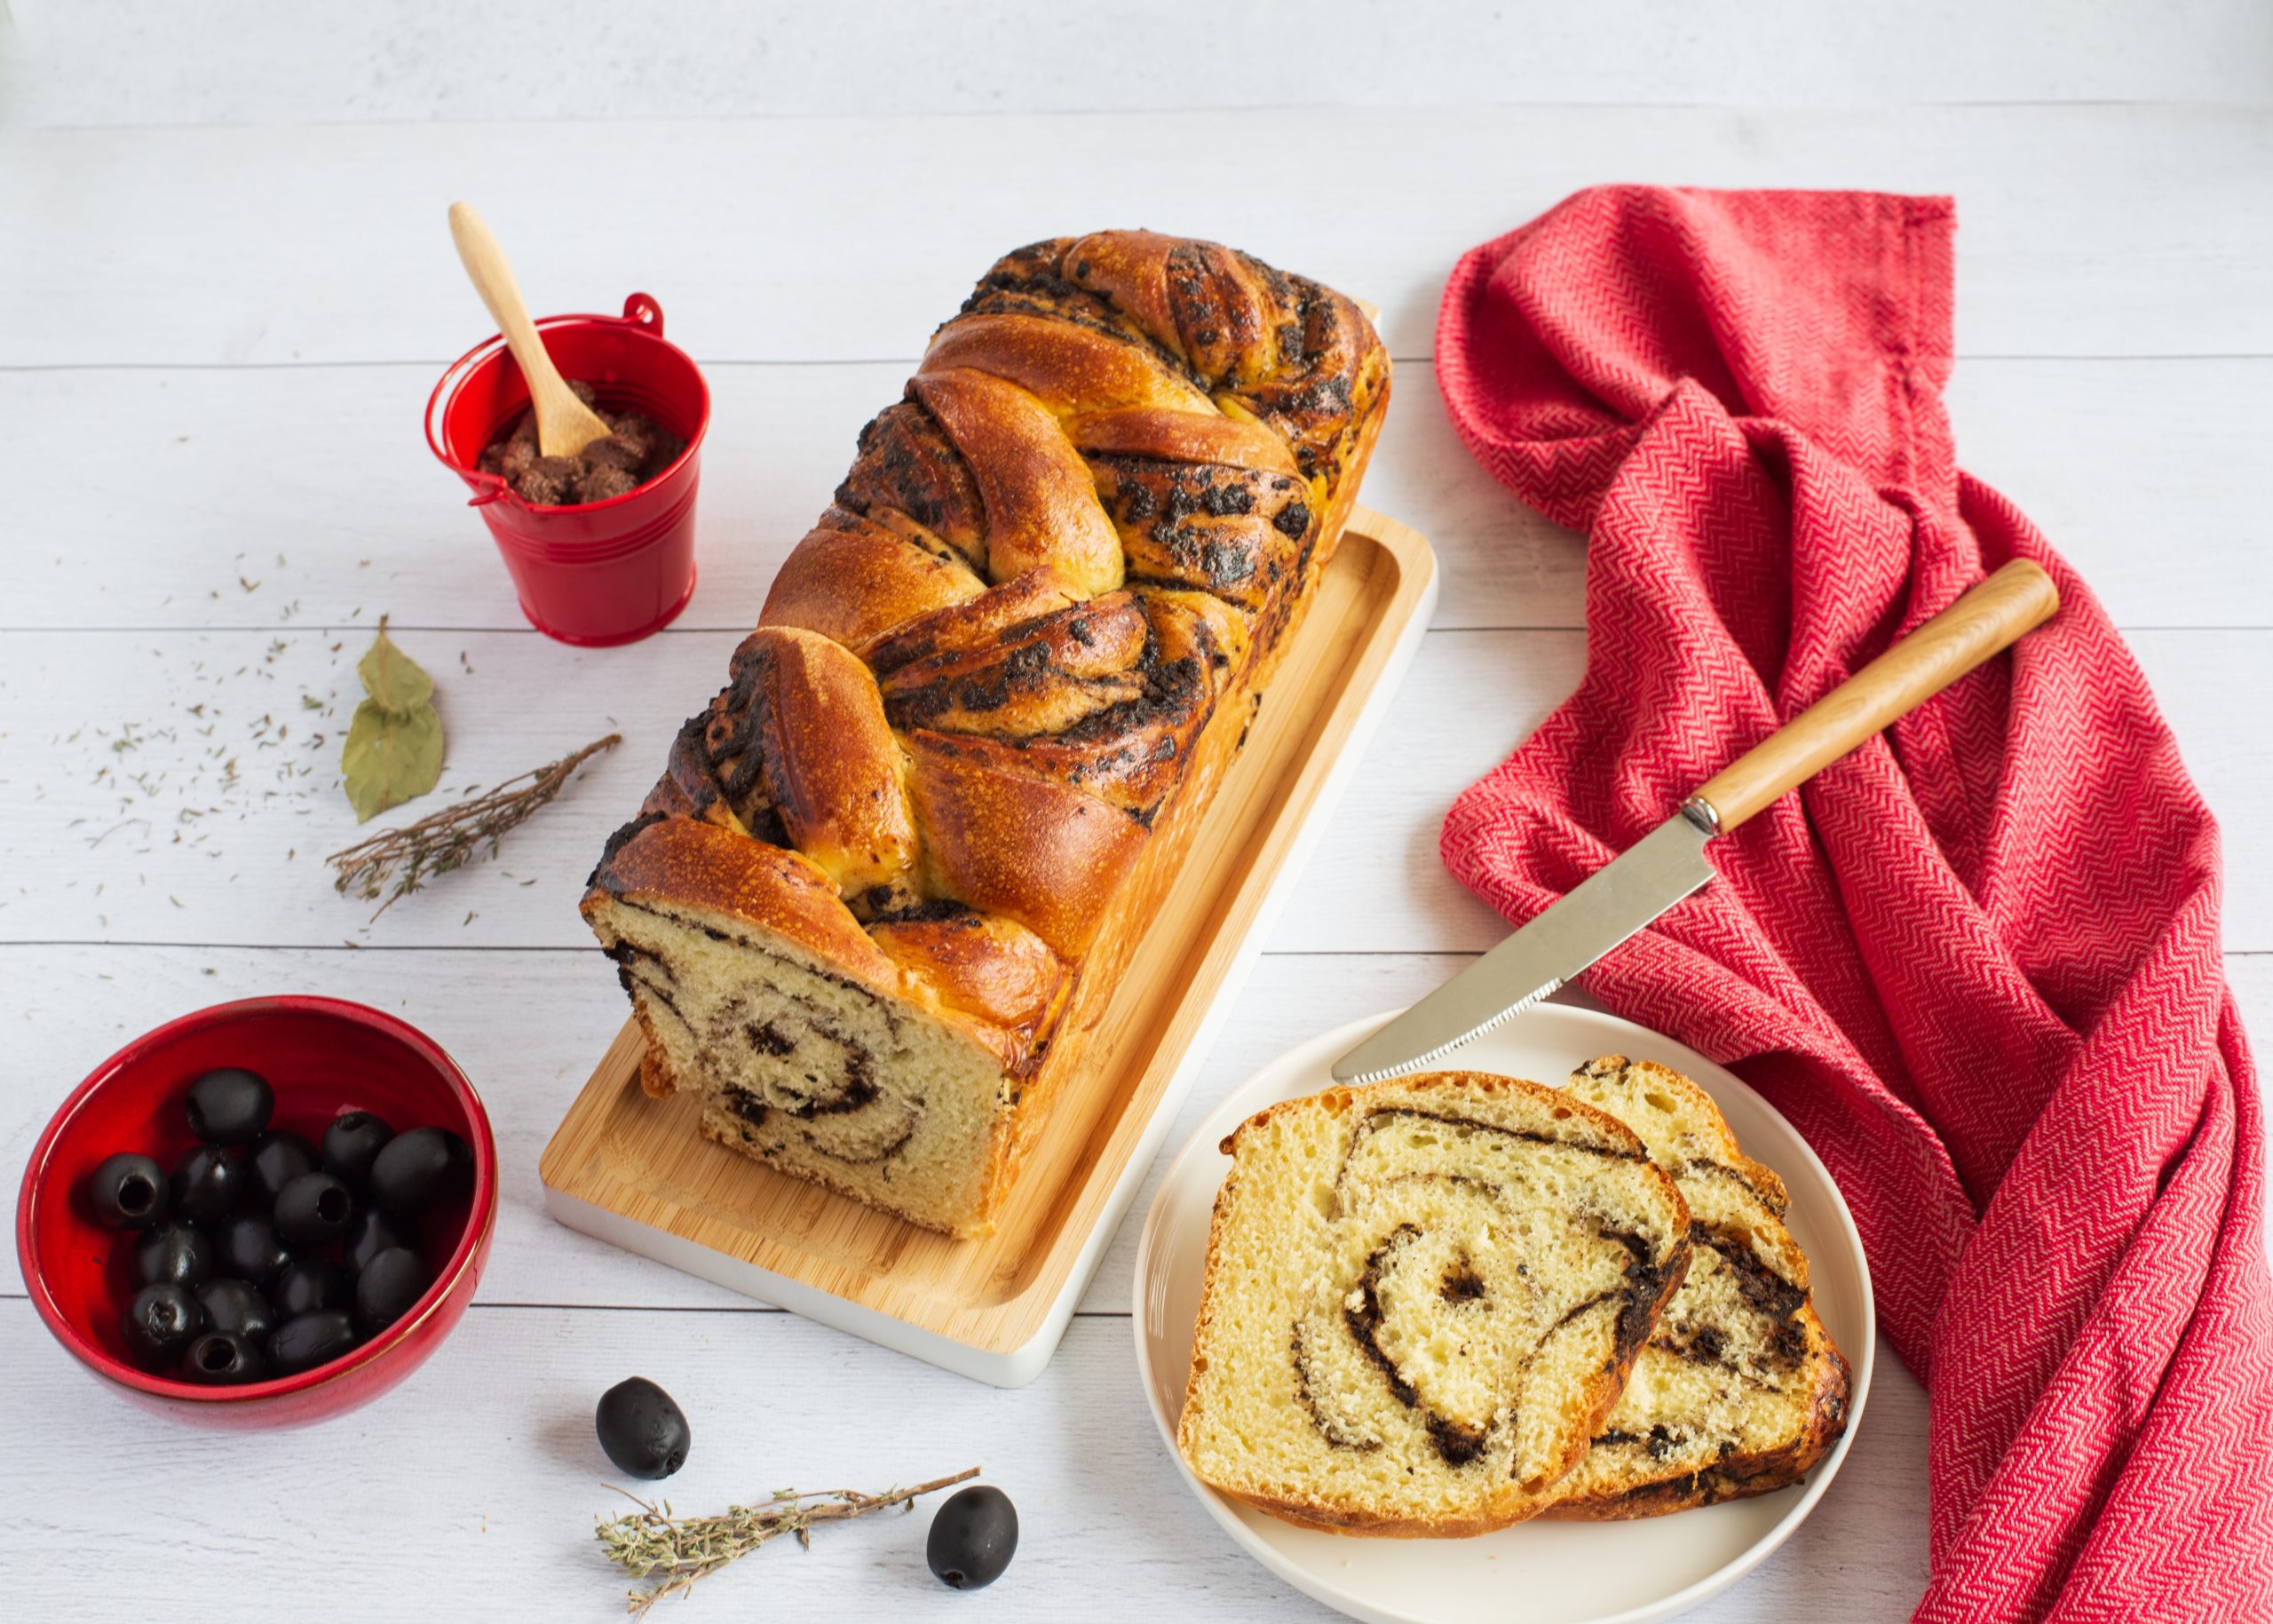 Delicious Chocolate Babka Recipe - Travel and Taste With Tracy